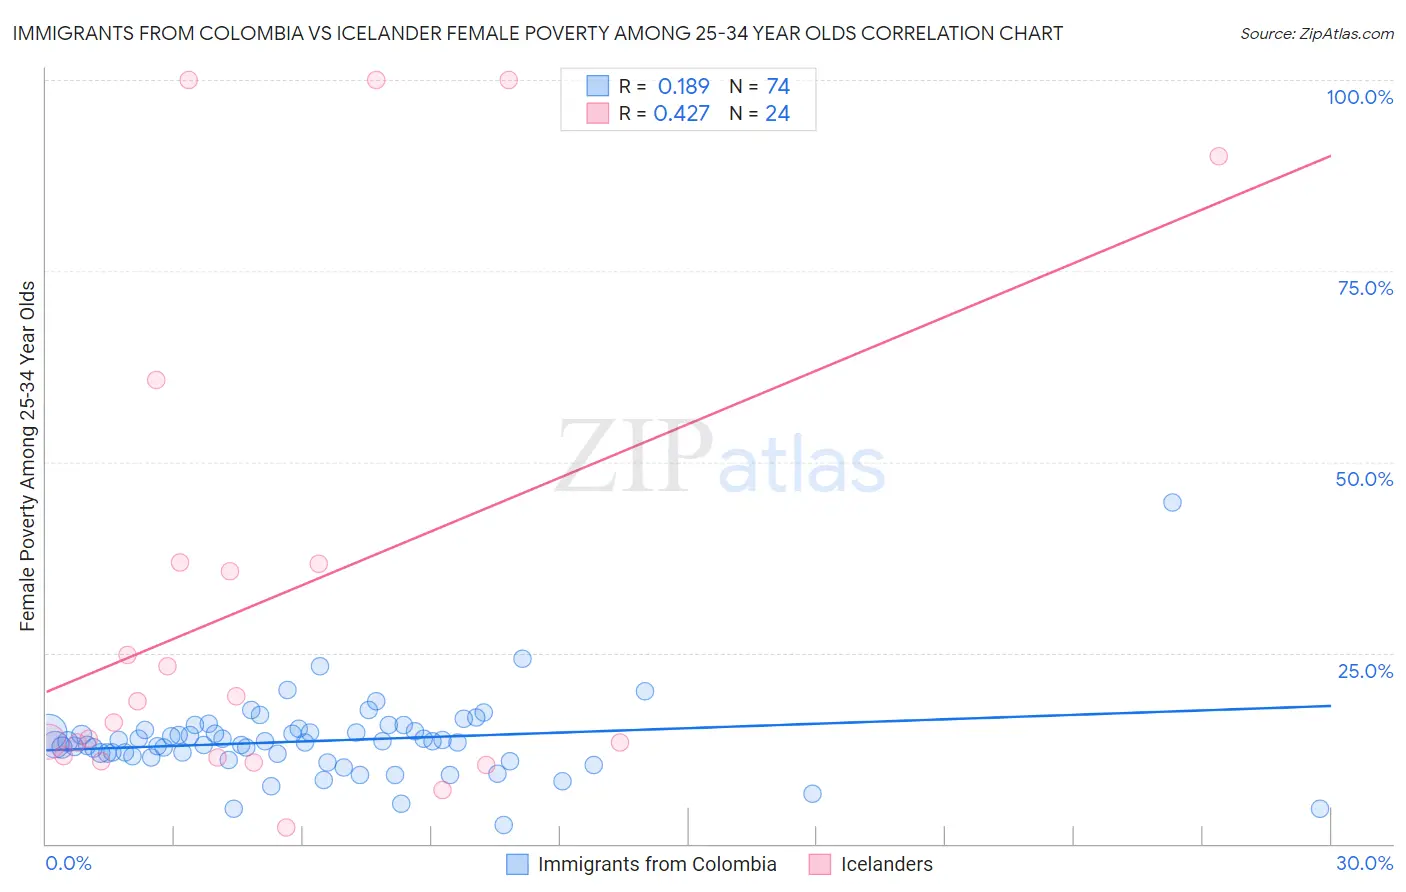 Immigrants from Colombia vs Icelander Female Poverty Among 25-34 Year Olds